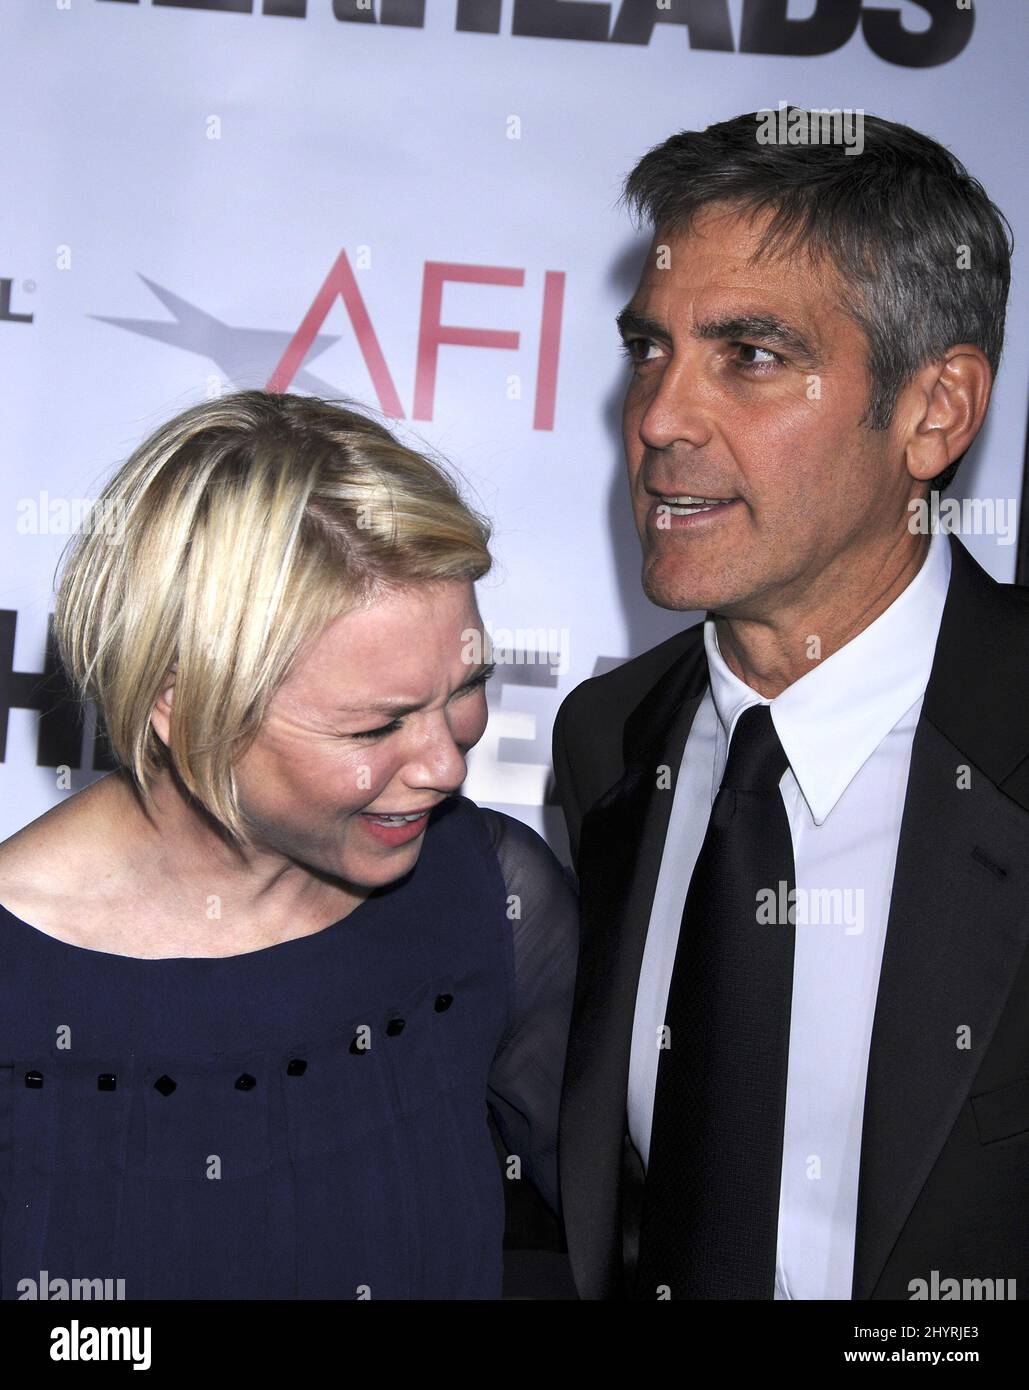 Renee Zellweger and George Clooney attend the Leatherheads world premiere held at Grauman's Chinese Theatre, Hollywood Stock Photo